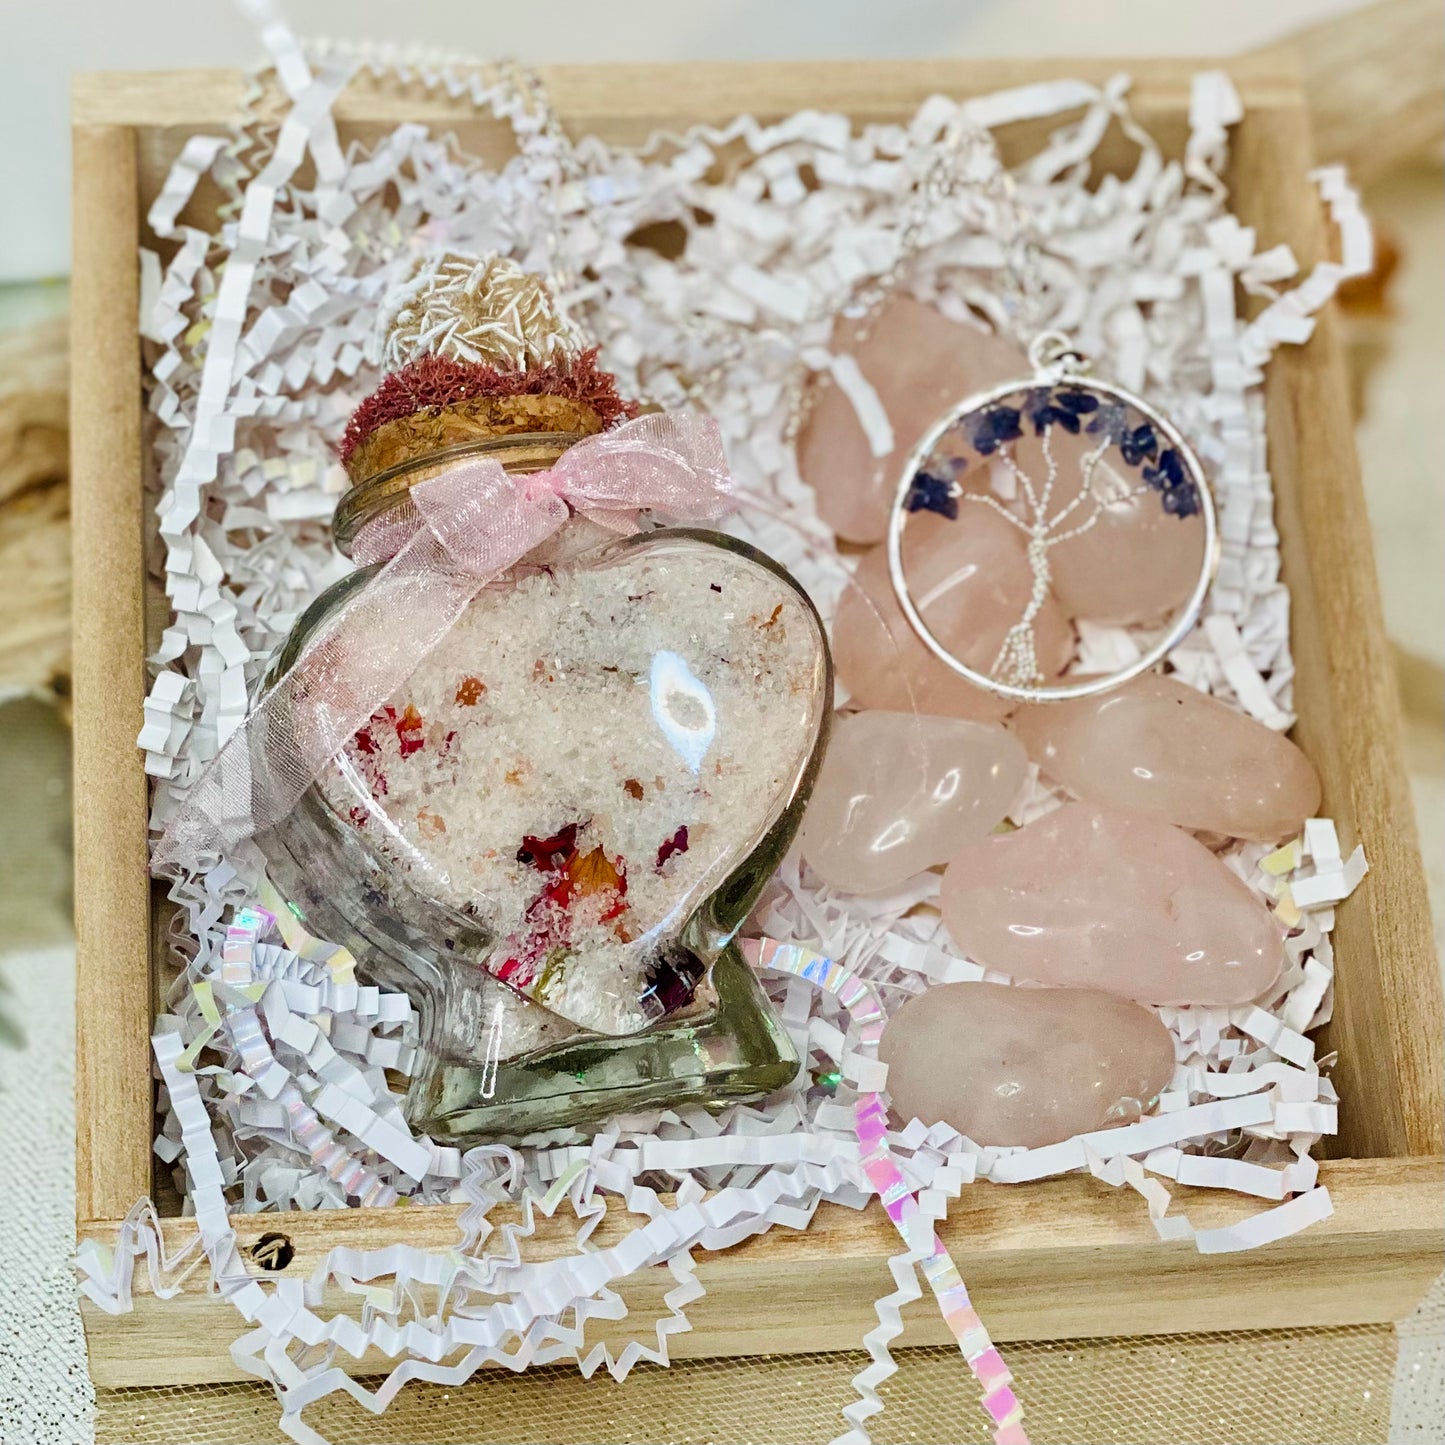 Harmony and Love Gift Set: Heart-Shaped Bath Salts with Desert Rose Crystal, Rose Quartz Tumbled Stones, and Tree of Life Necklace